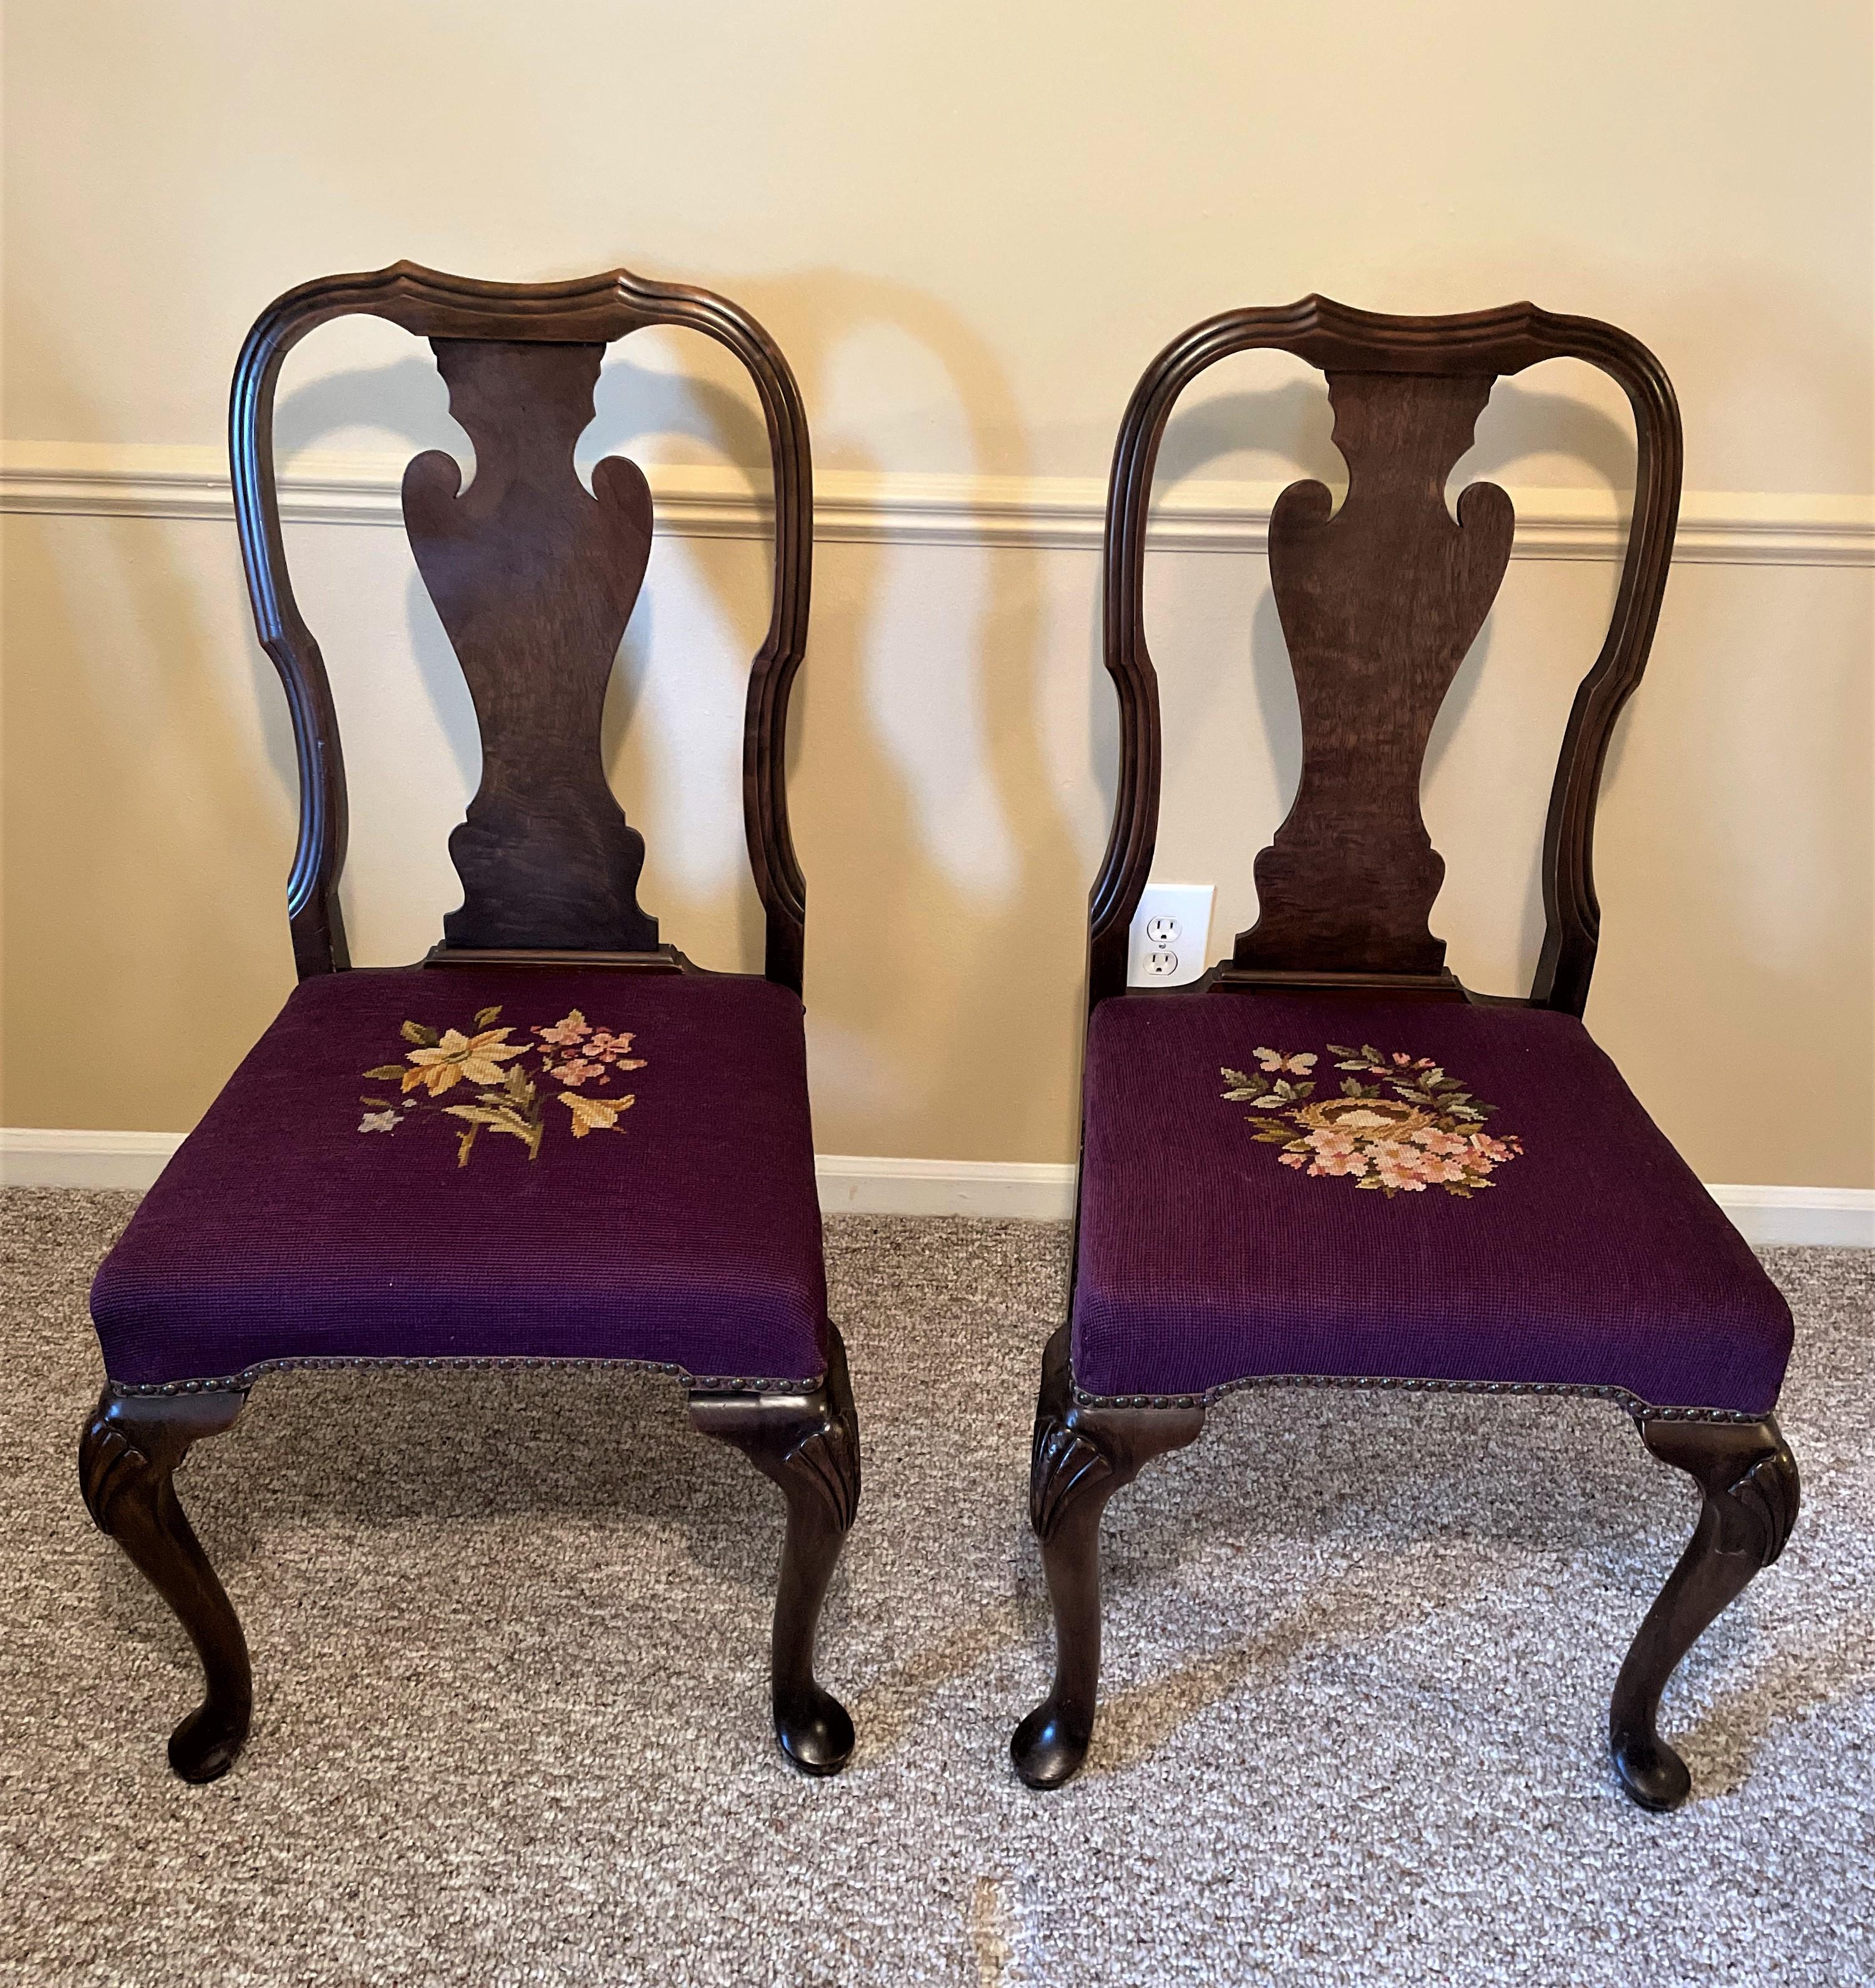 20th Century 1930s Queen Ann Solid Walnut Dining Chairs with Aubergine Wool Needlepoint Seats For Sale